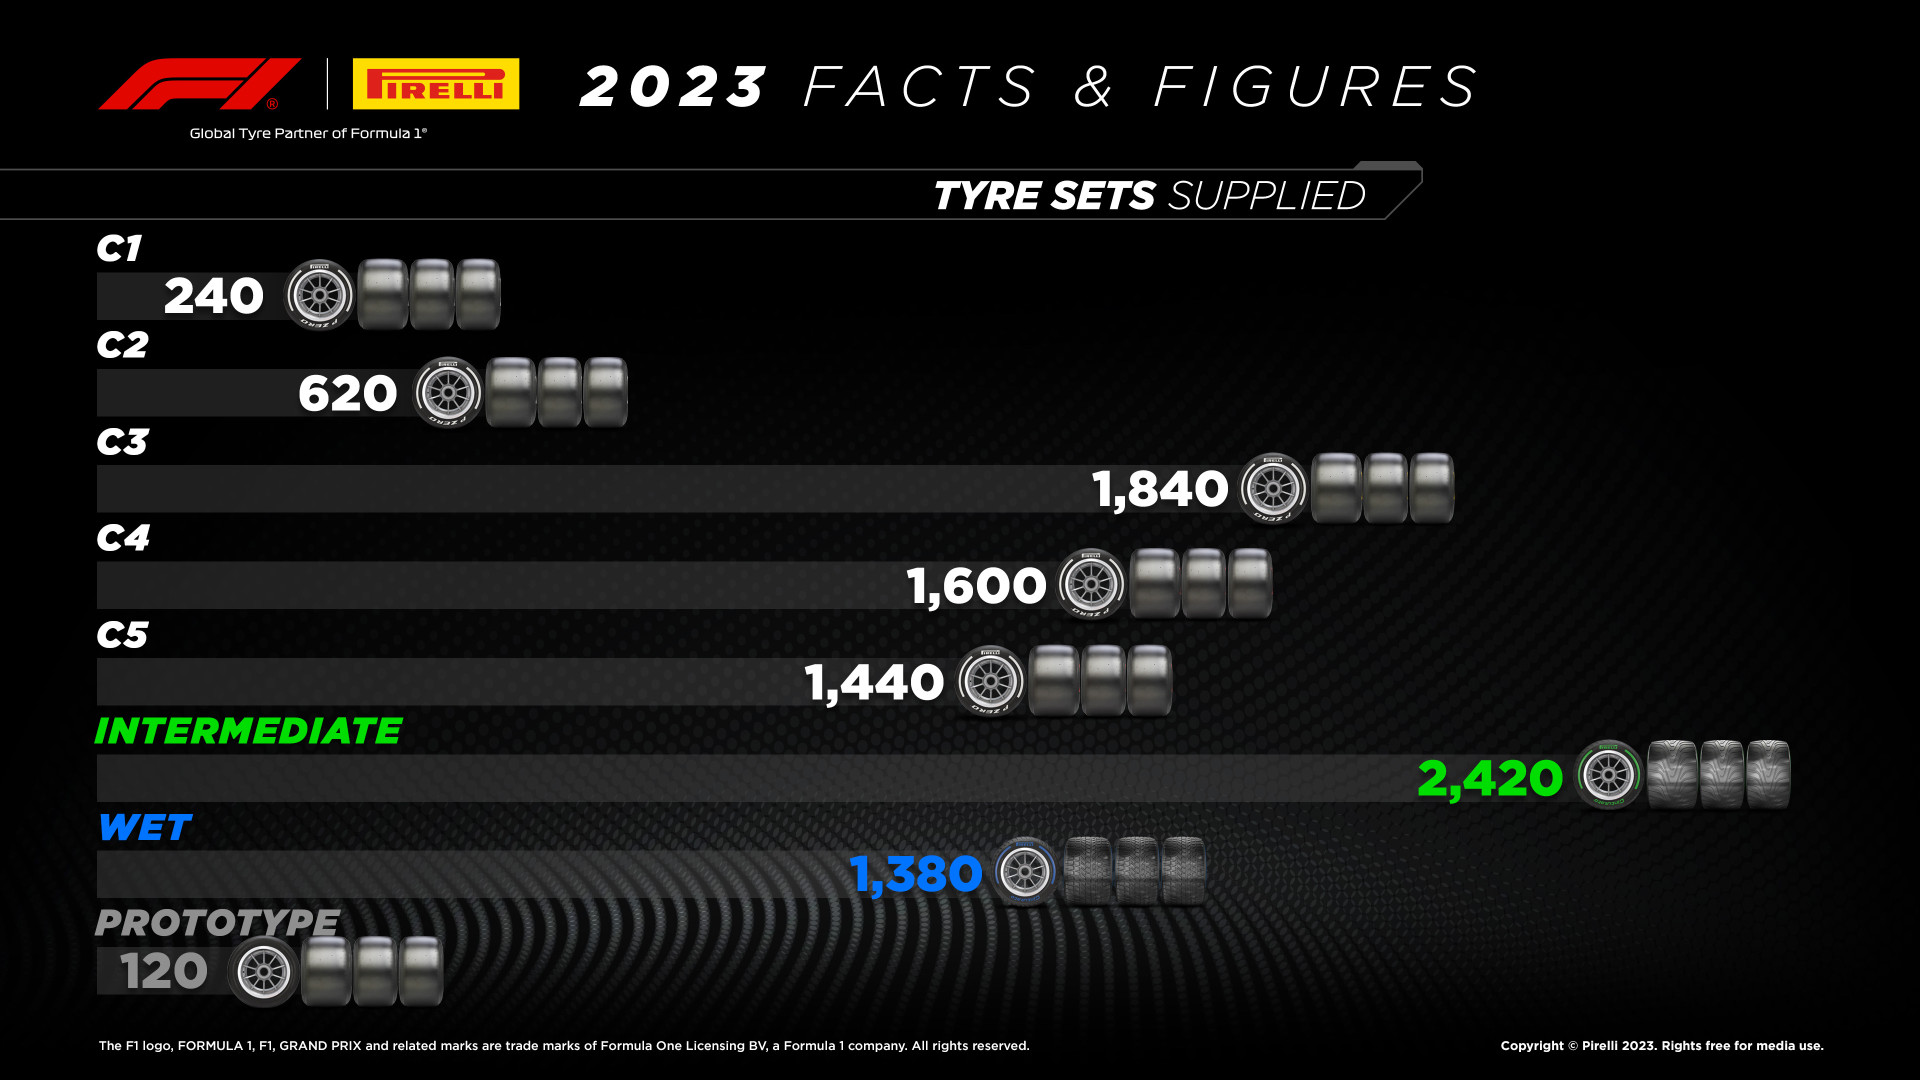 2023 Facts and Figures - Tyre Sets Supplied